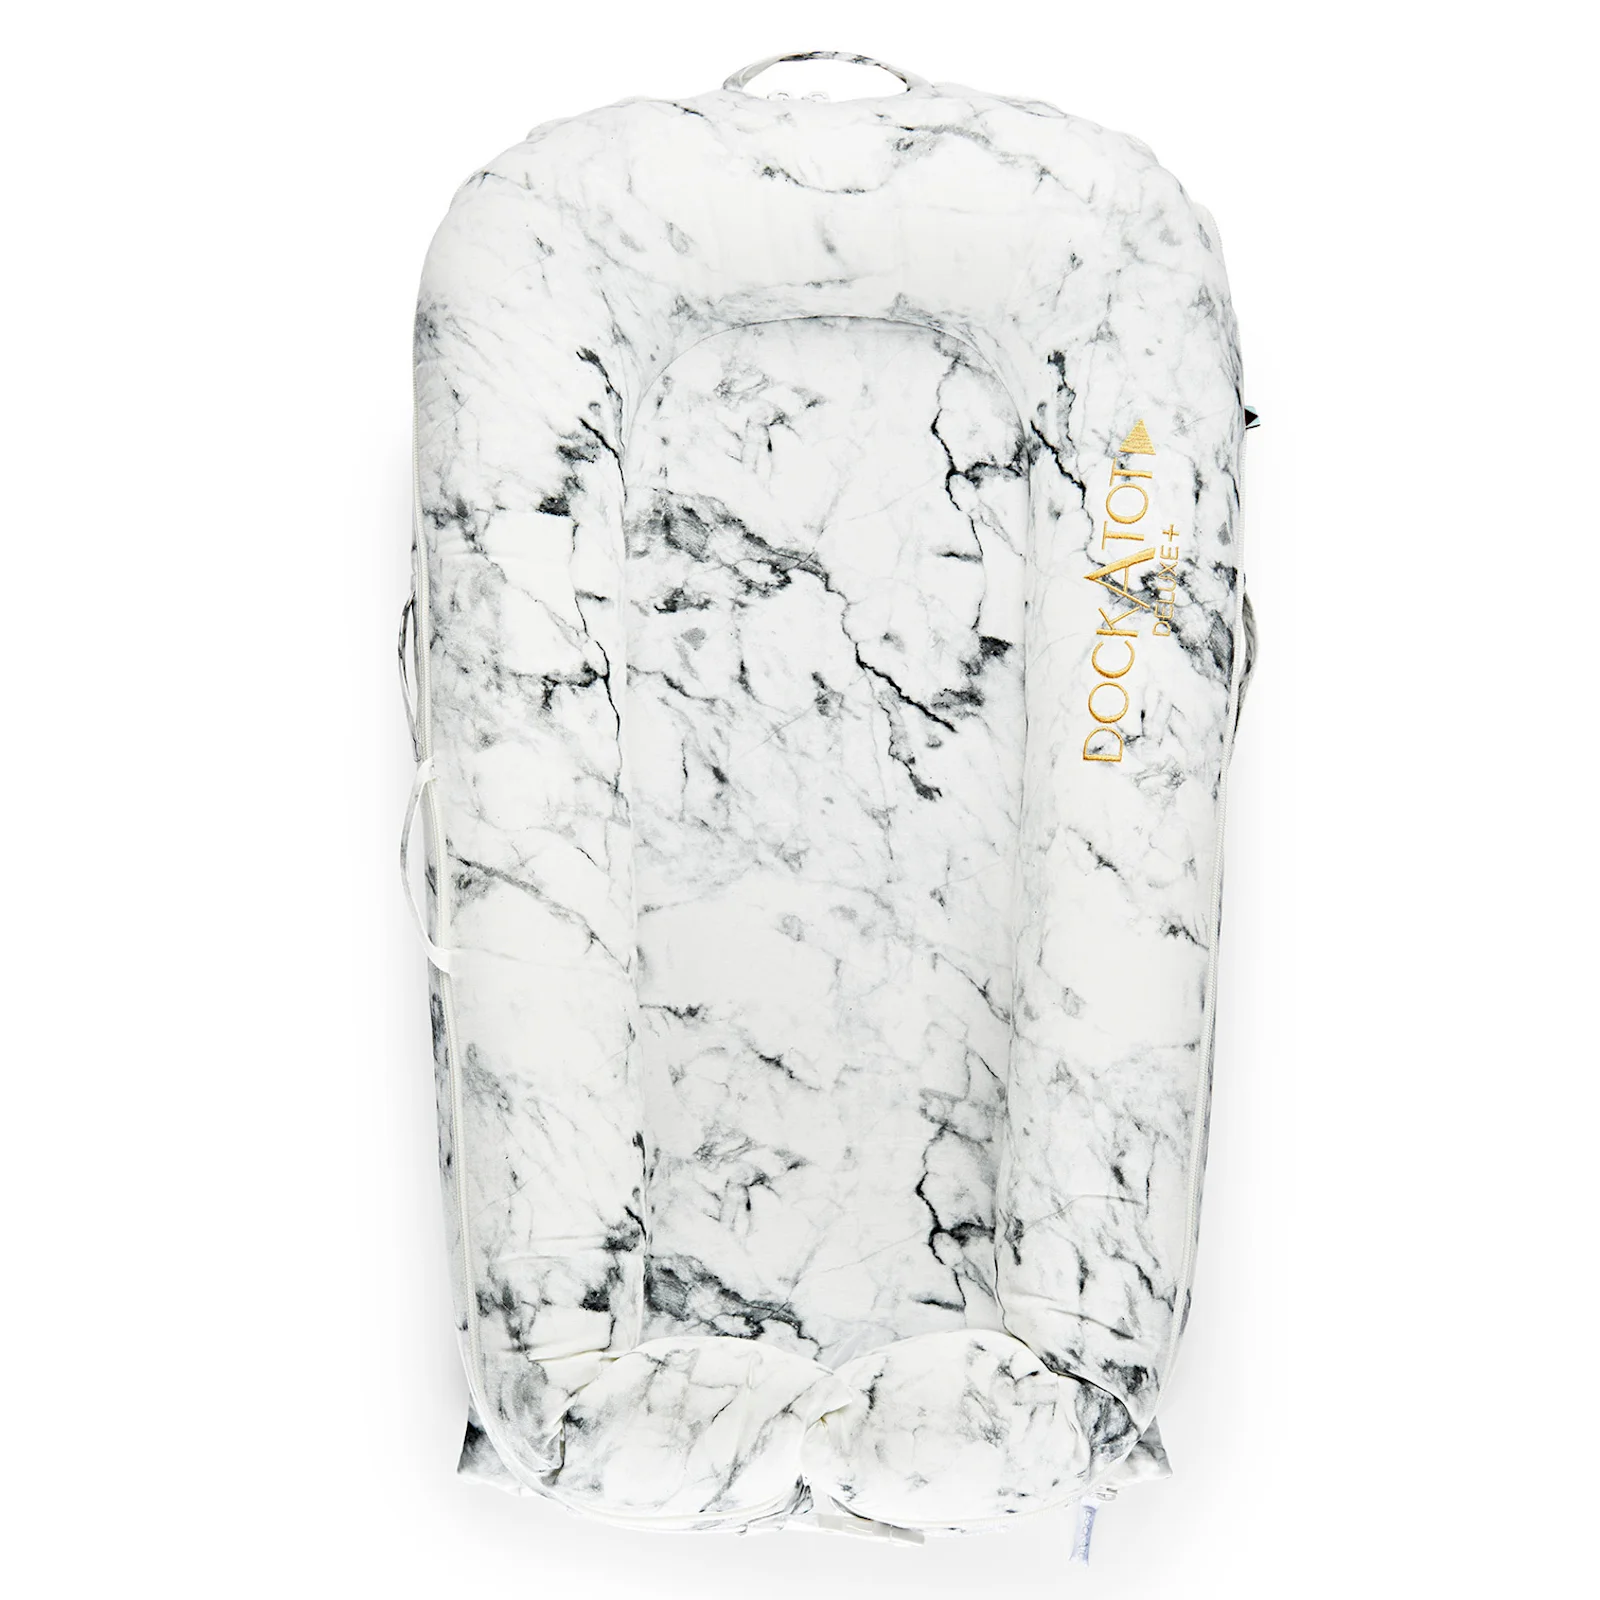 DockATot Deluxe + Pod for 0-8 Months - Carrara Marble Image 1